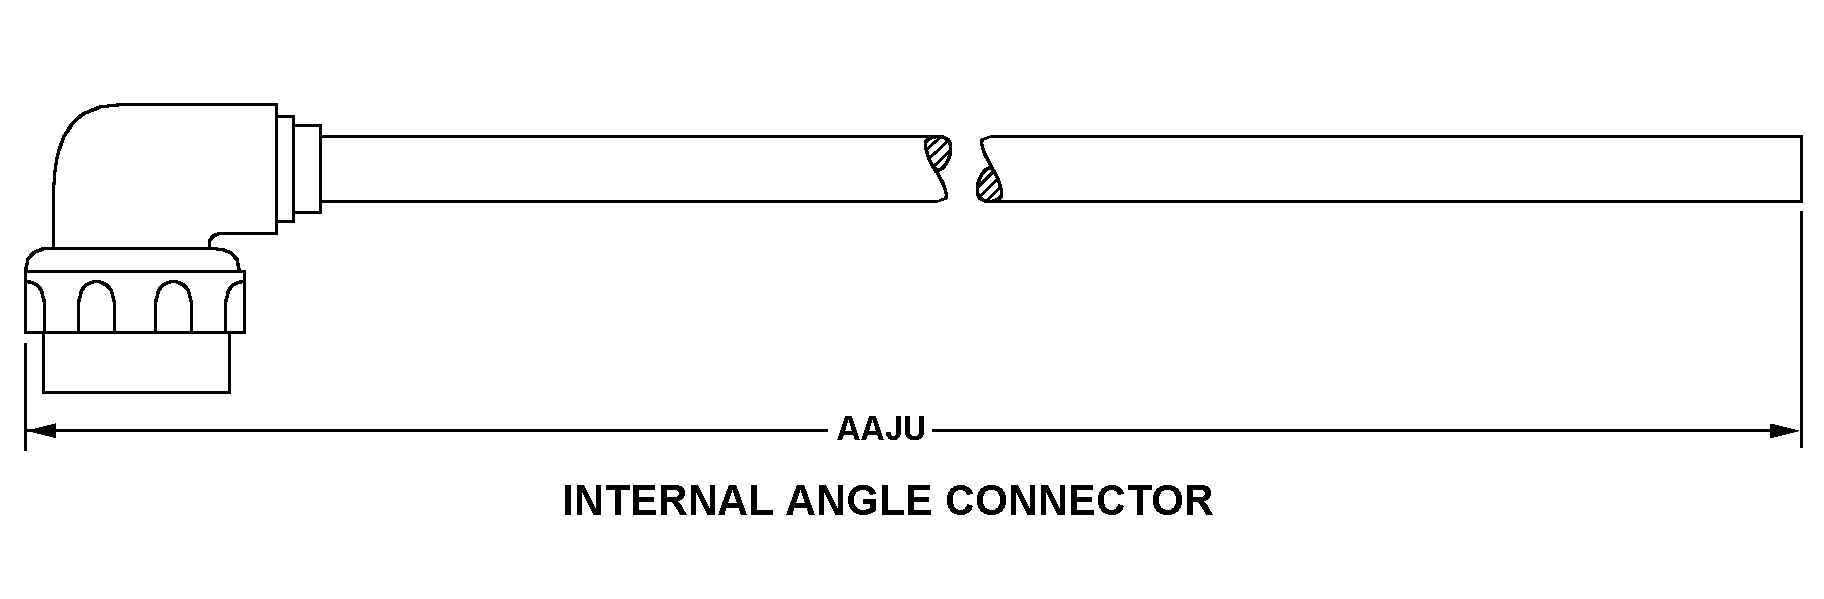 INTERNAL ANGLE CONNECTOR style nsn 5995-00-853-6776